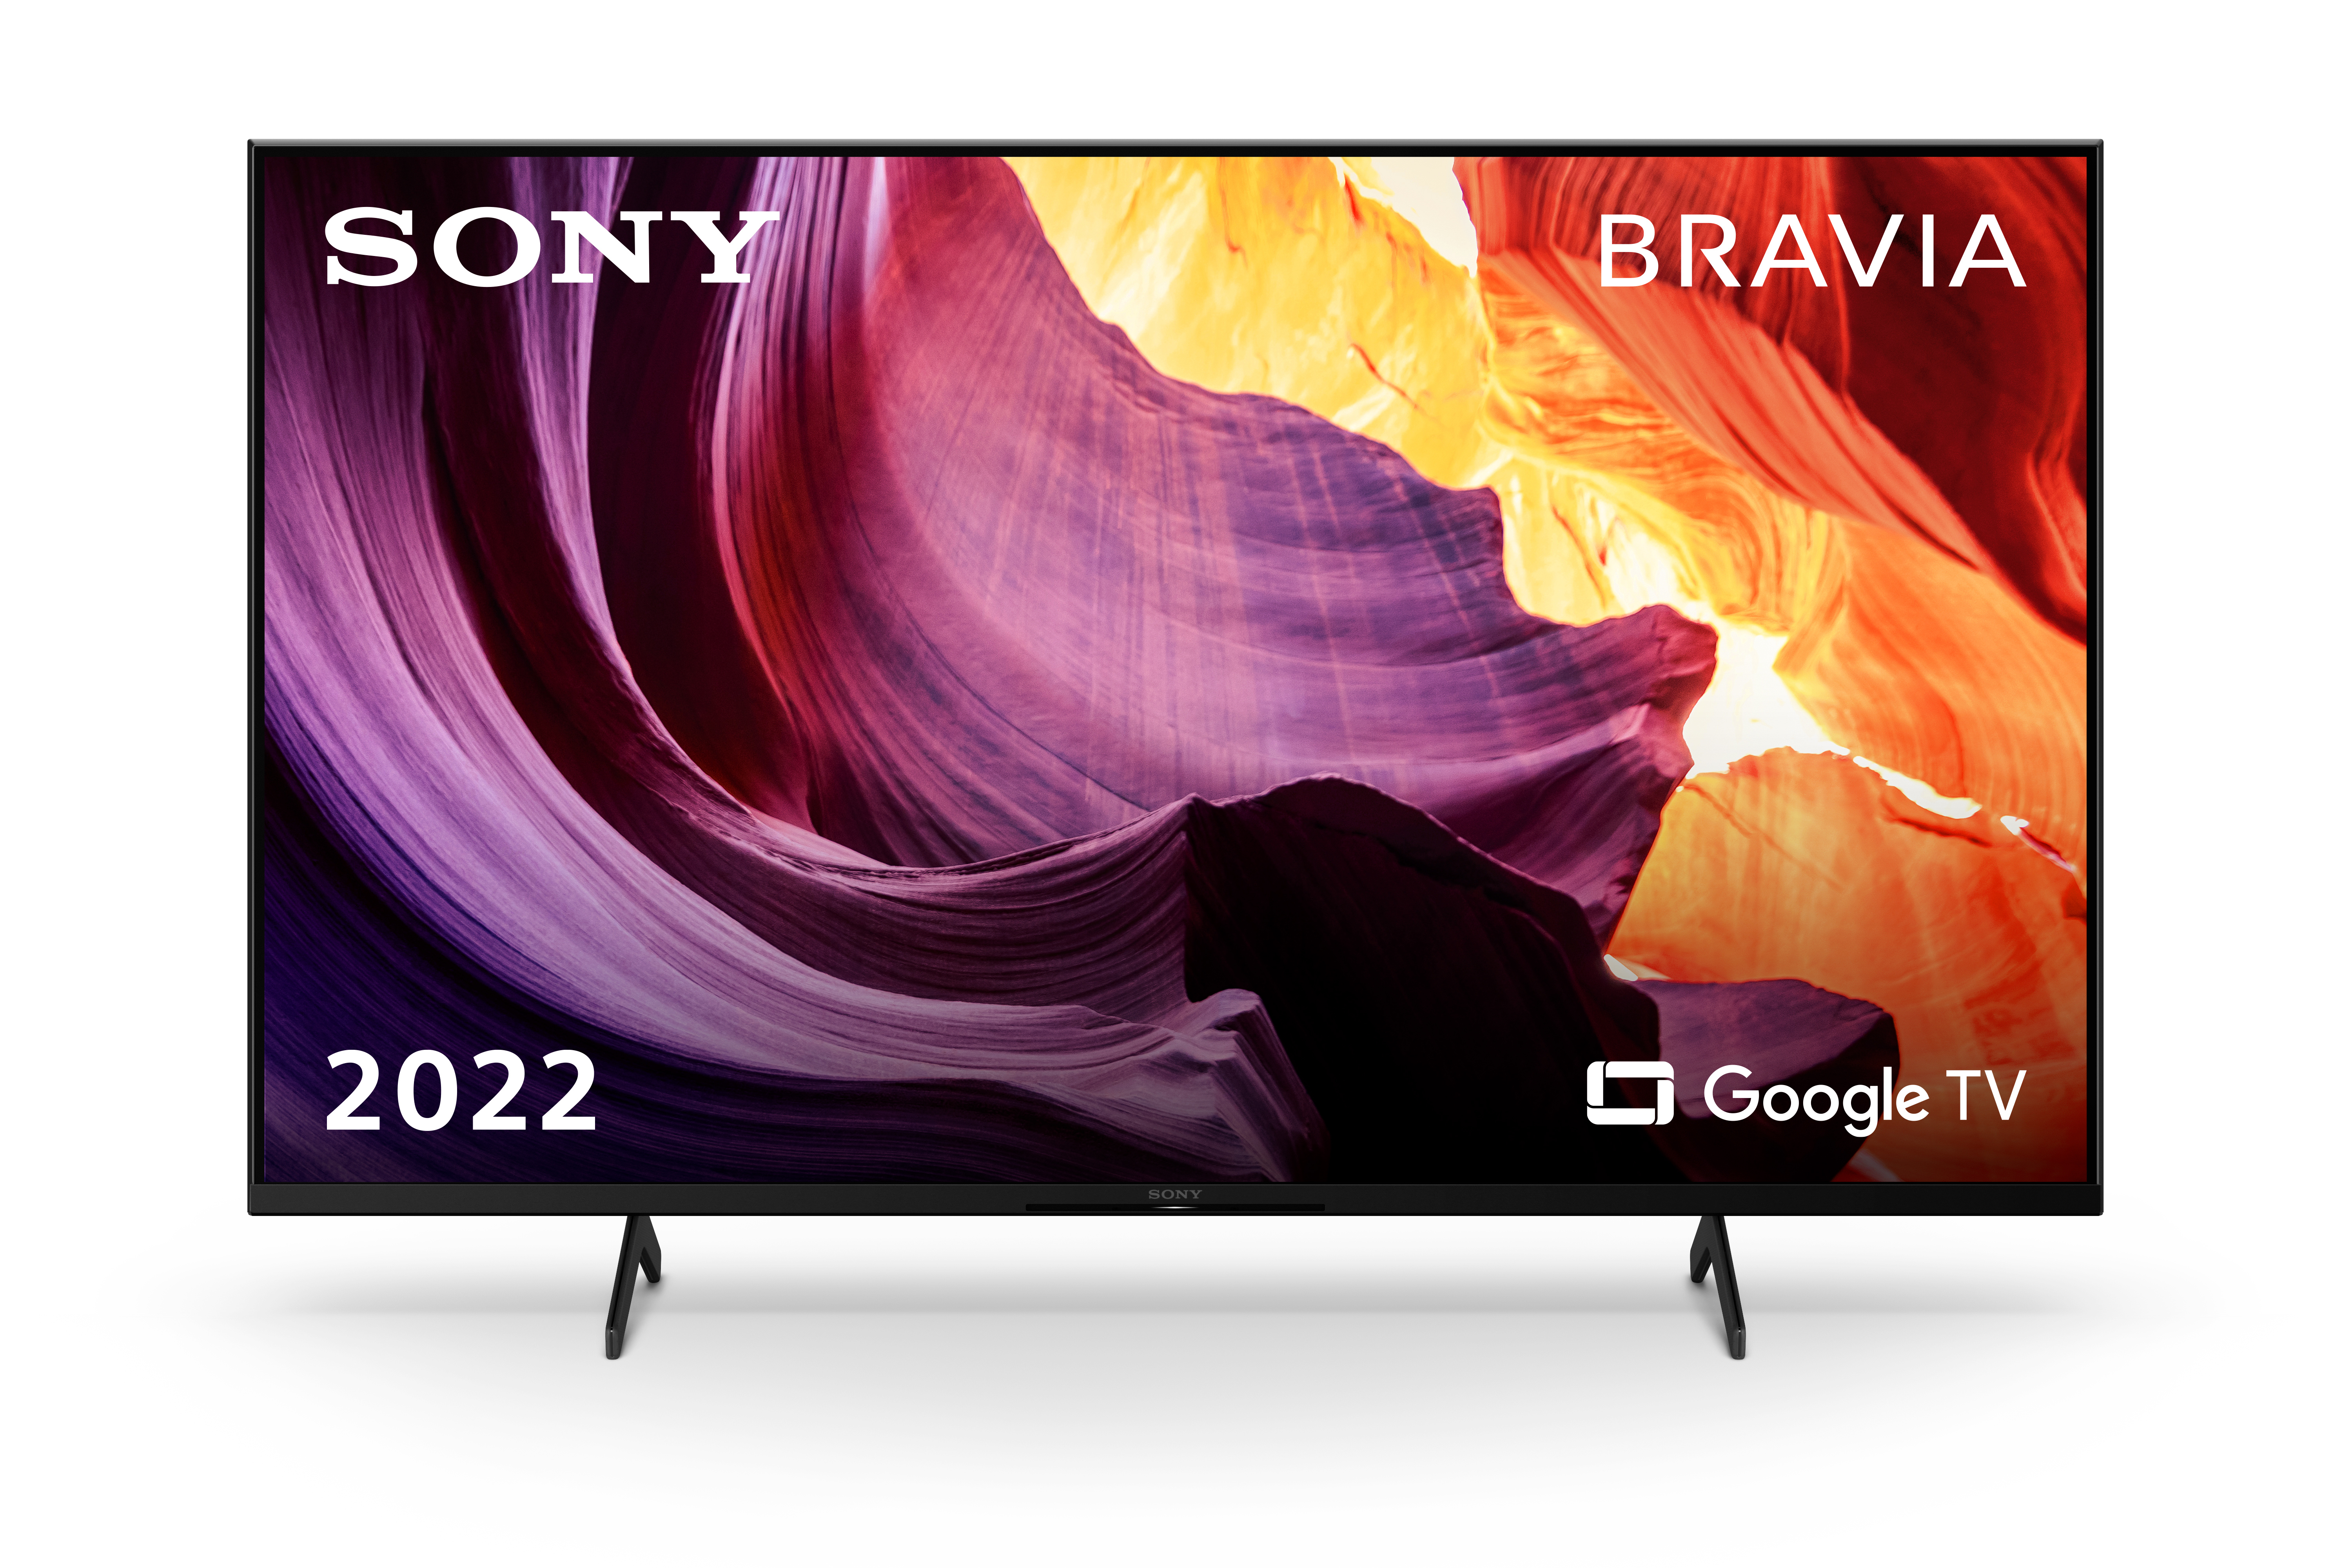 Image of Sony BRAVIA, KD-50X81K, Smart Google TV, 50”, LED, 4K UHD, HDR, Perfect for Playstation, con BRAVIA CORE